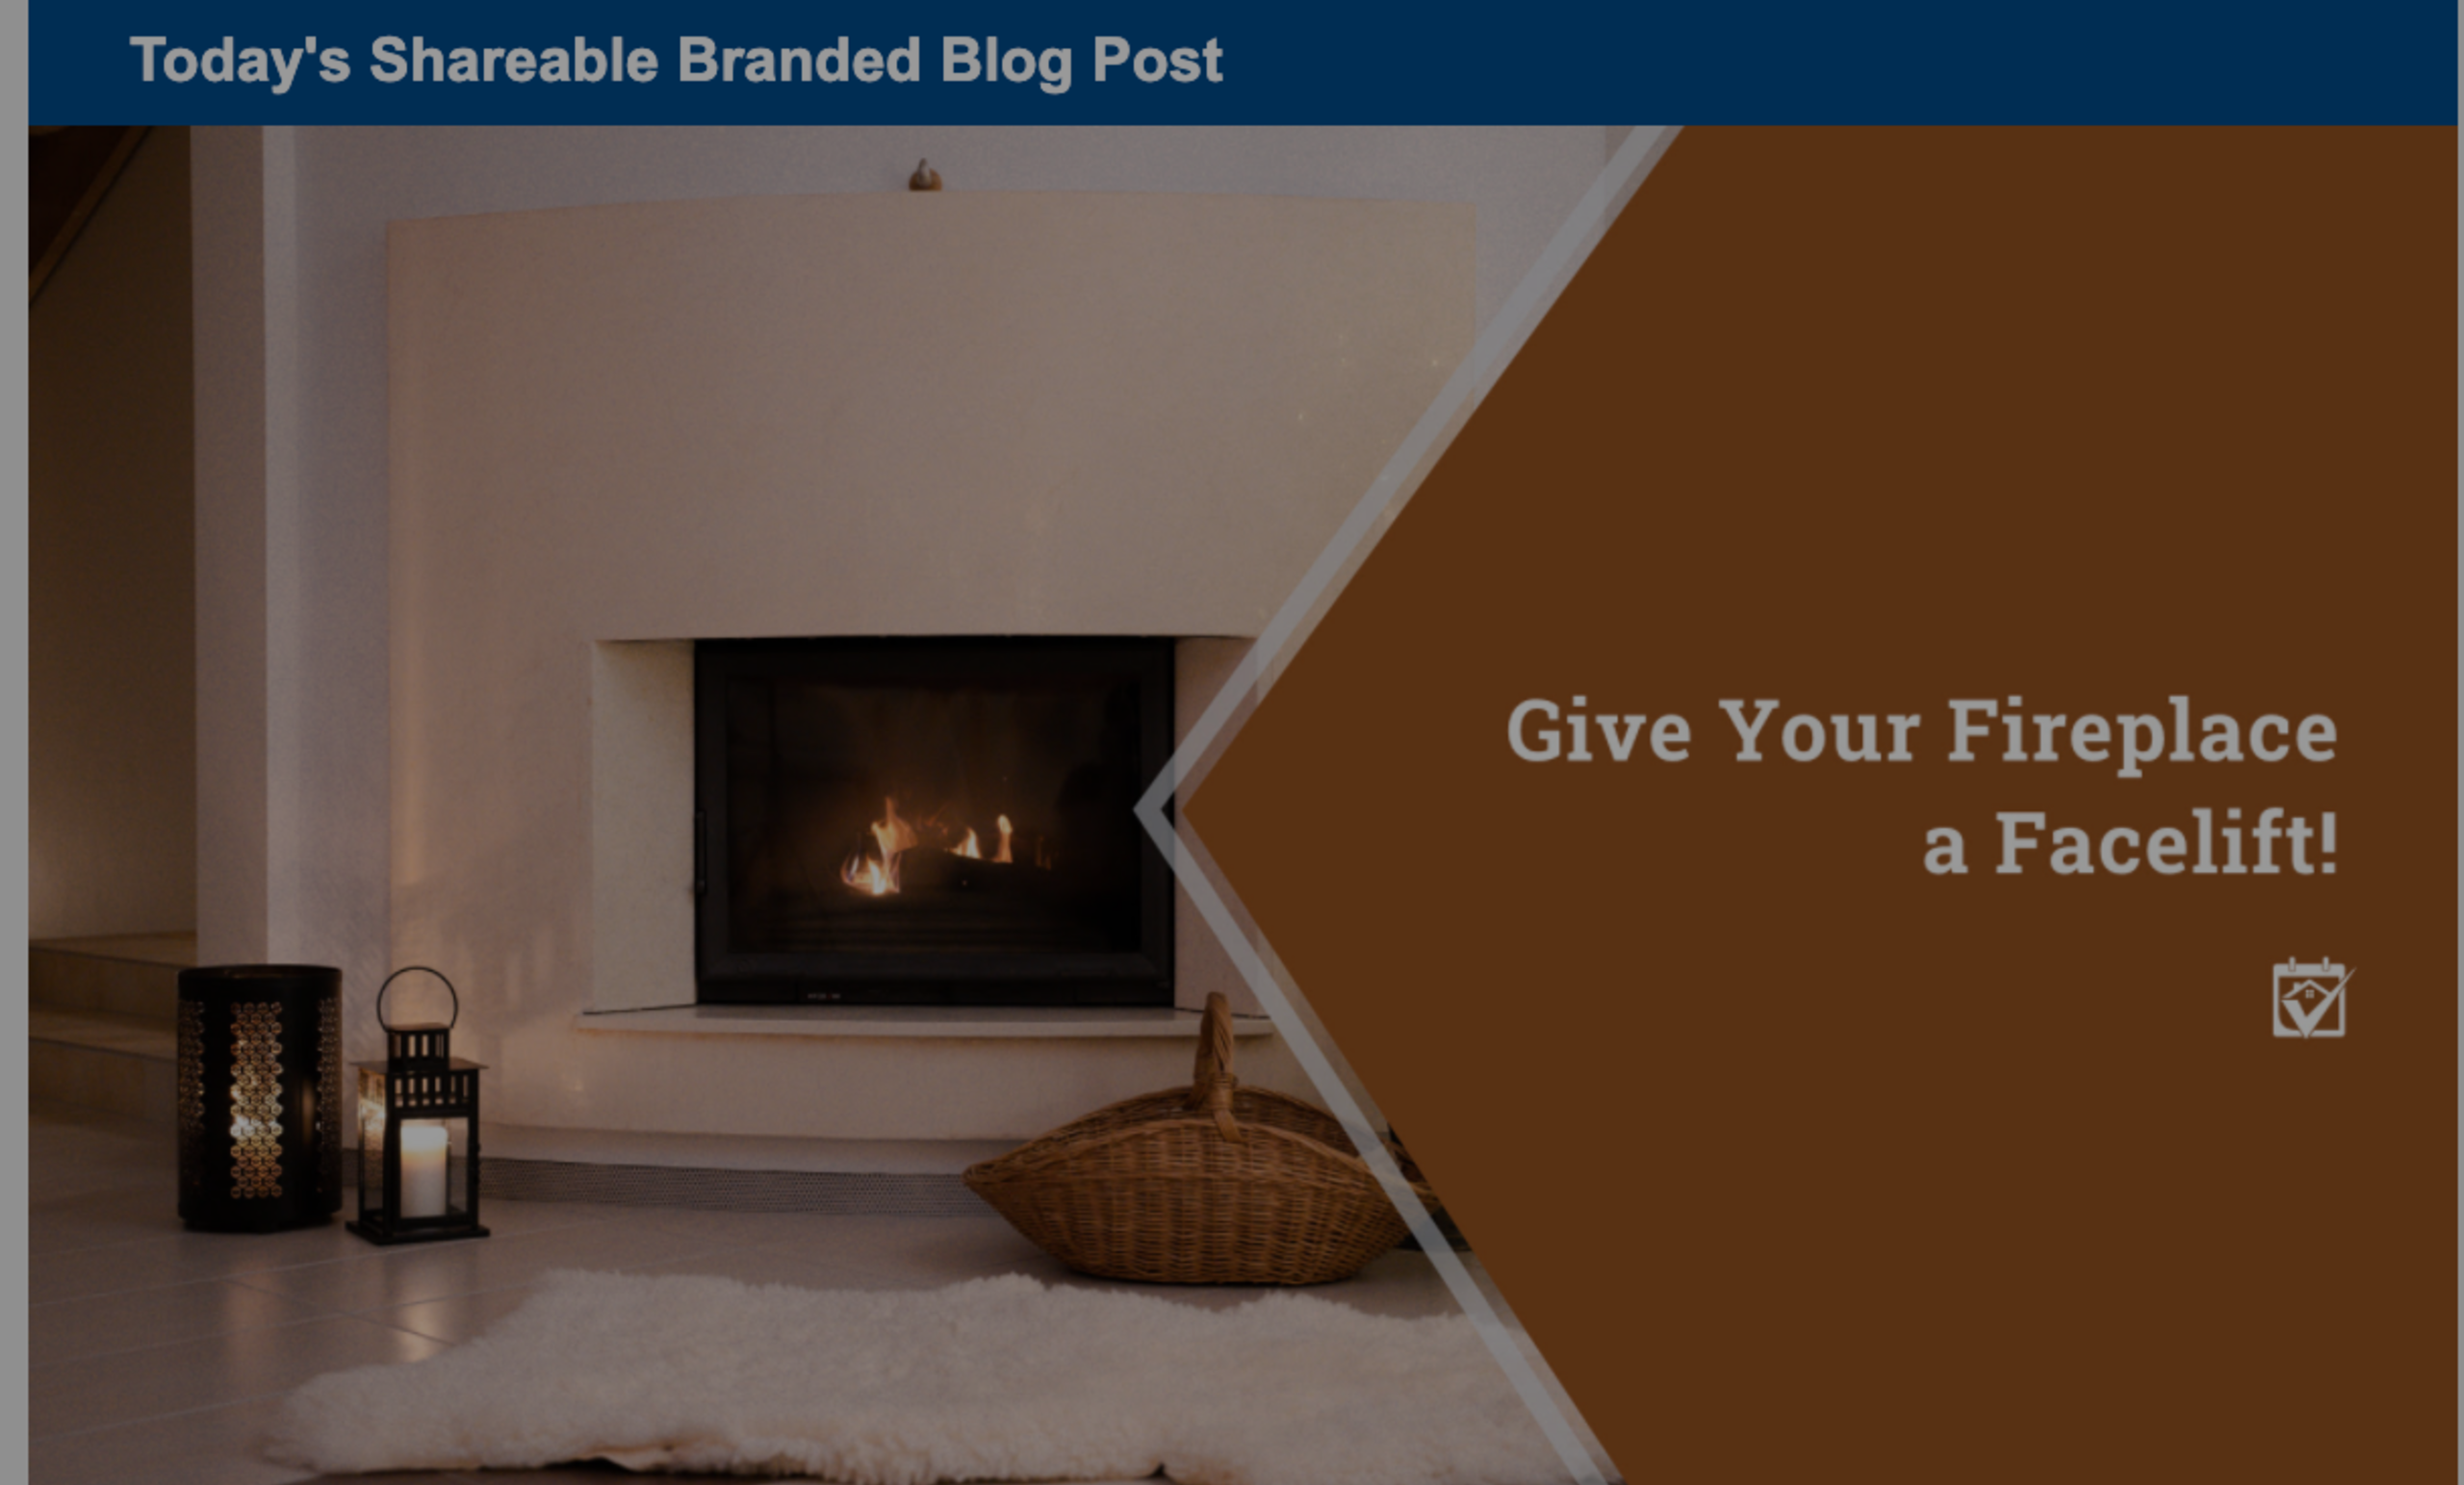 Give Your Fireplace a Facelift!